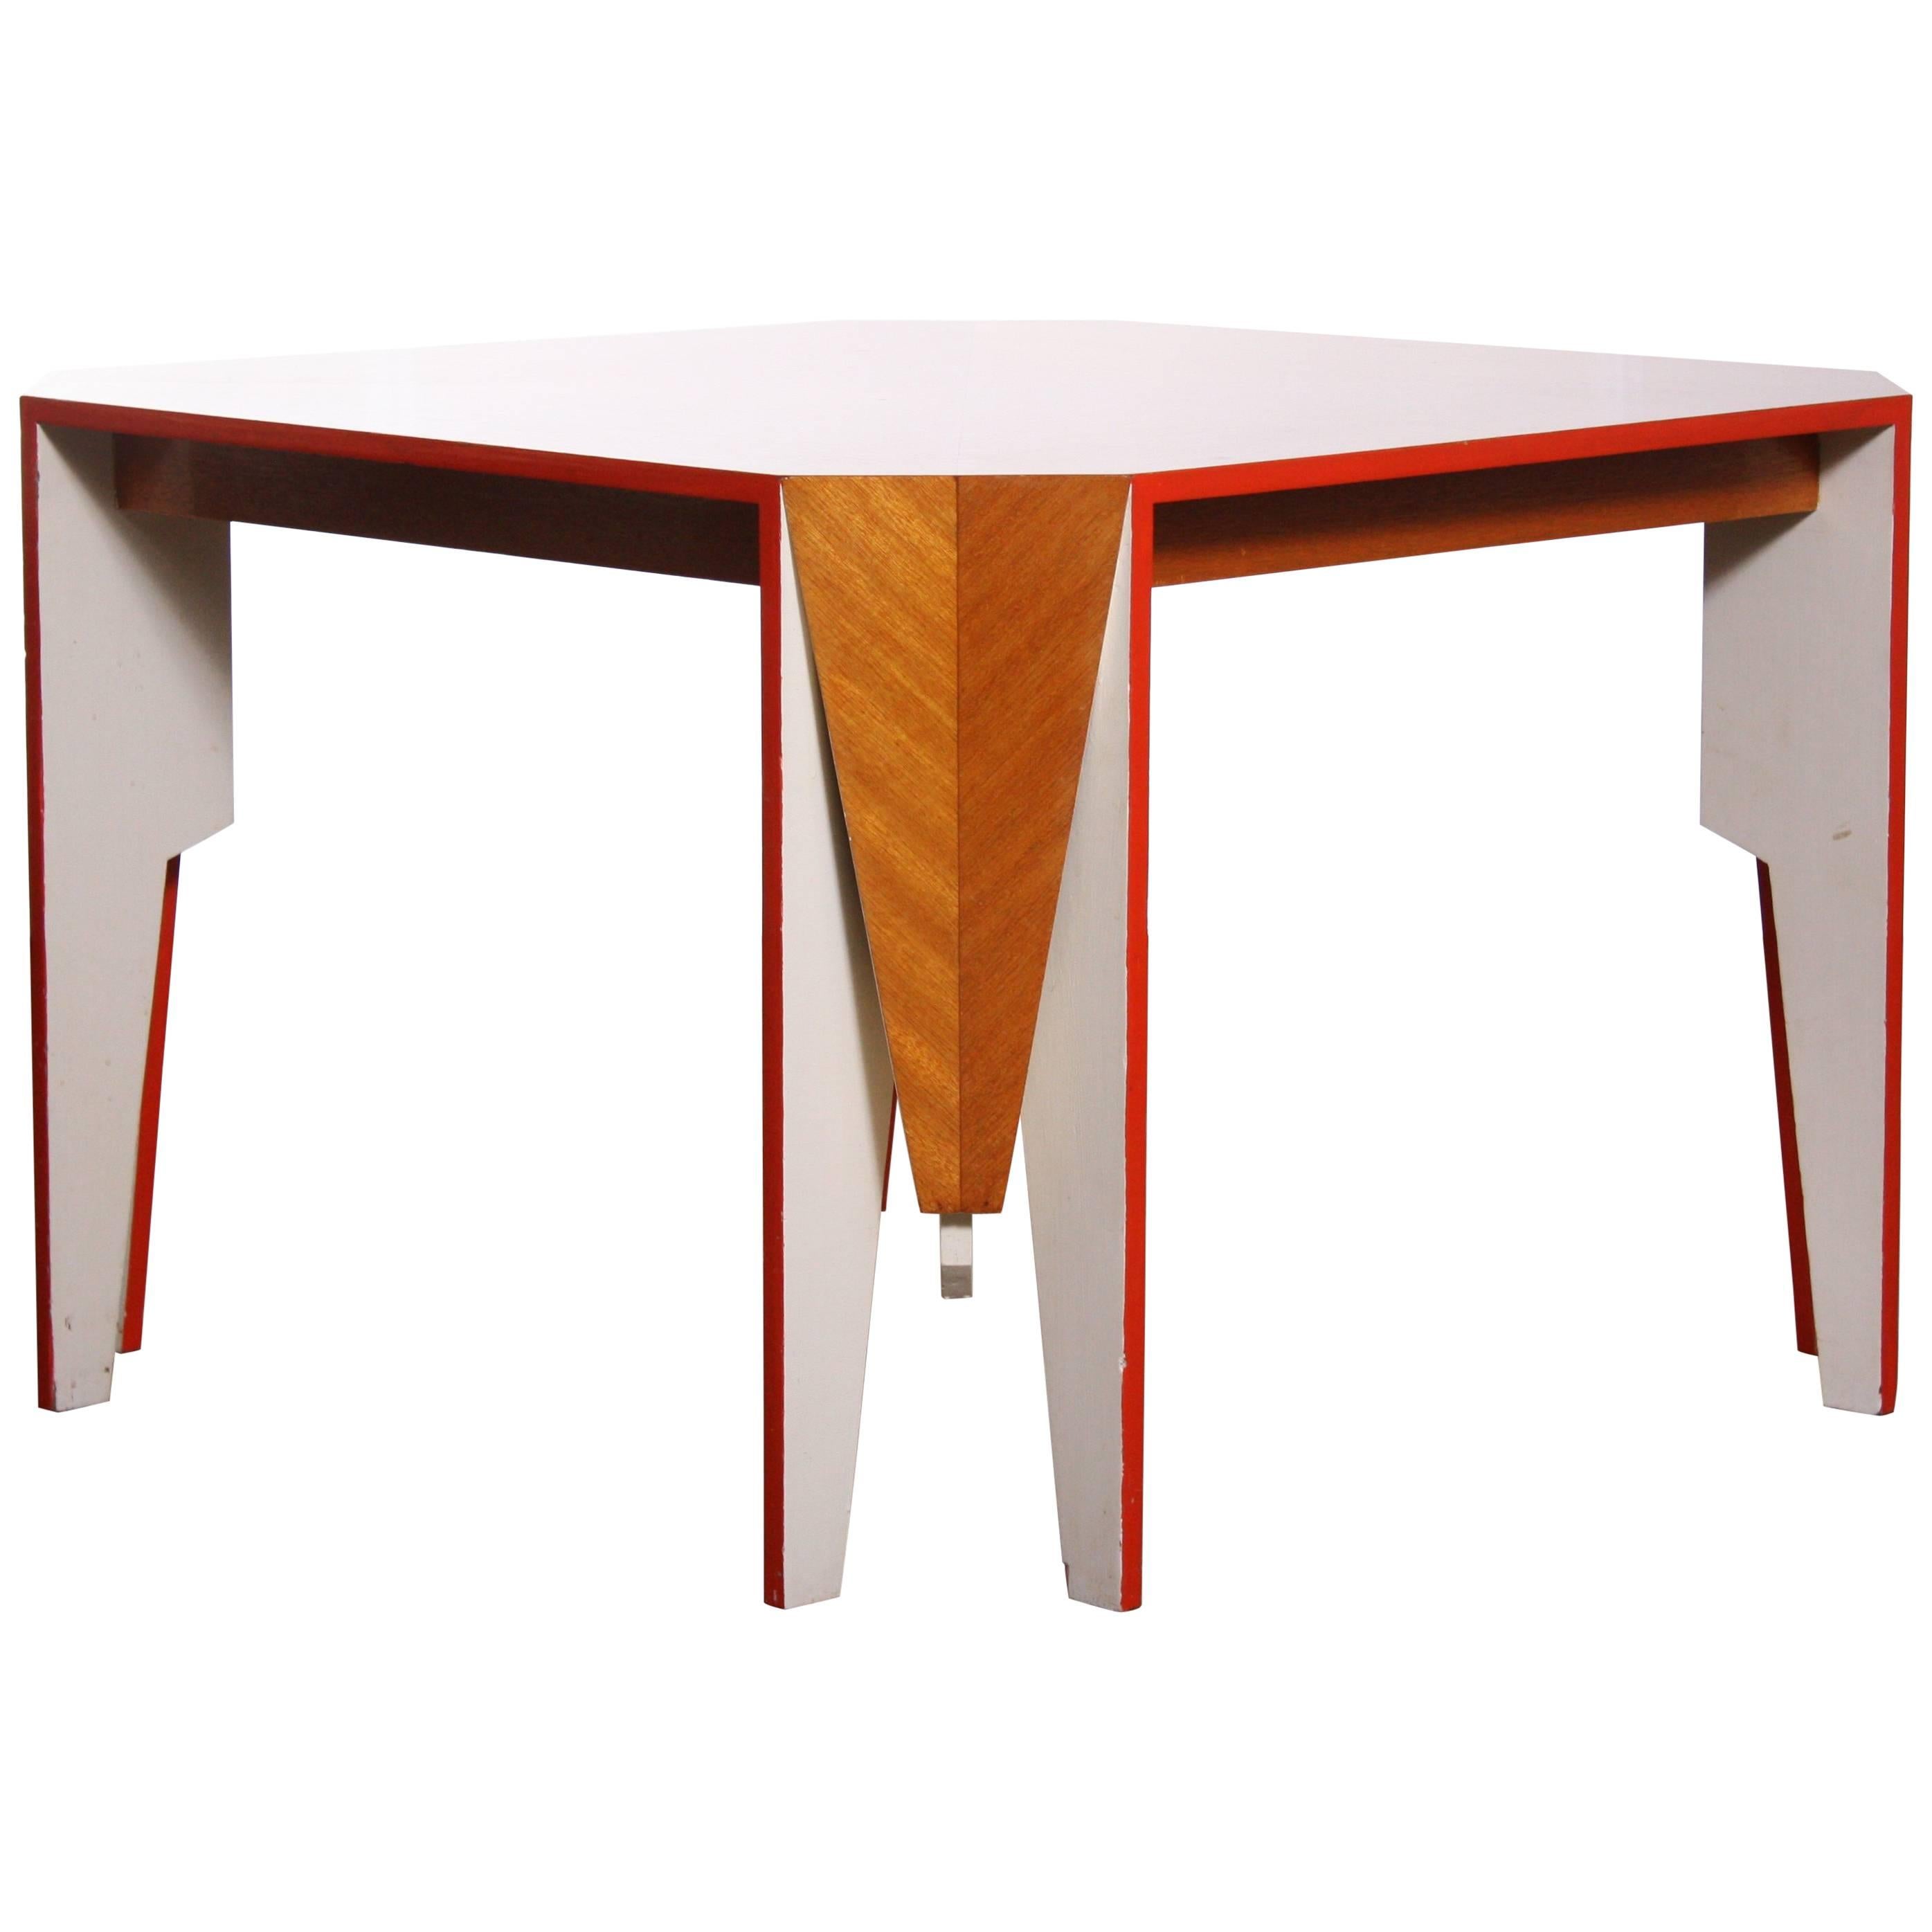 Architectural Dining Table Inspired by Bruce Goff